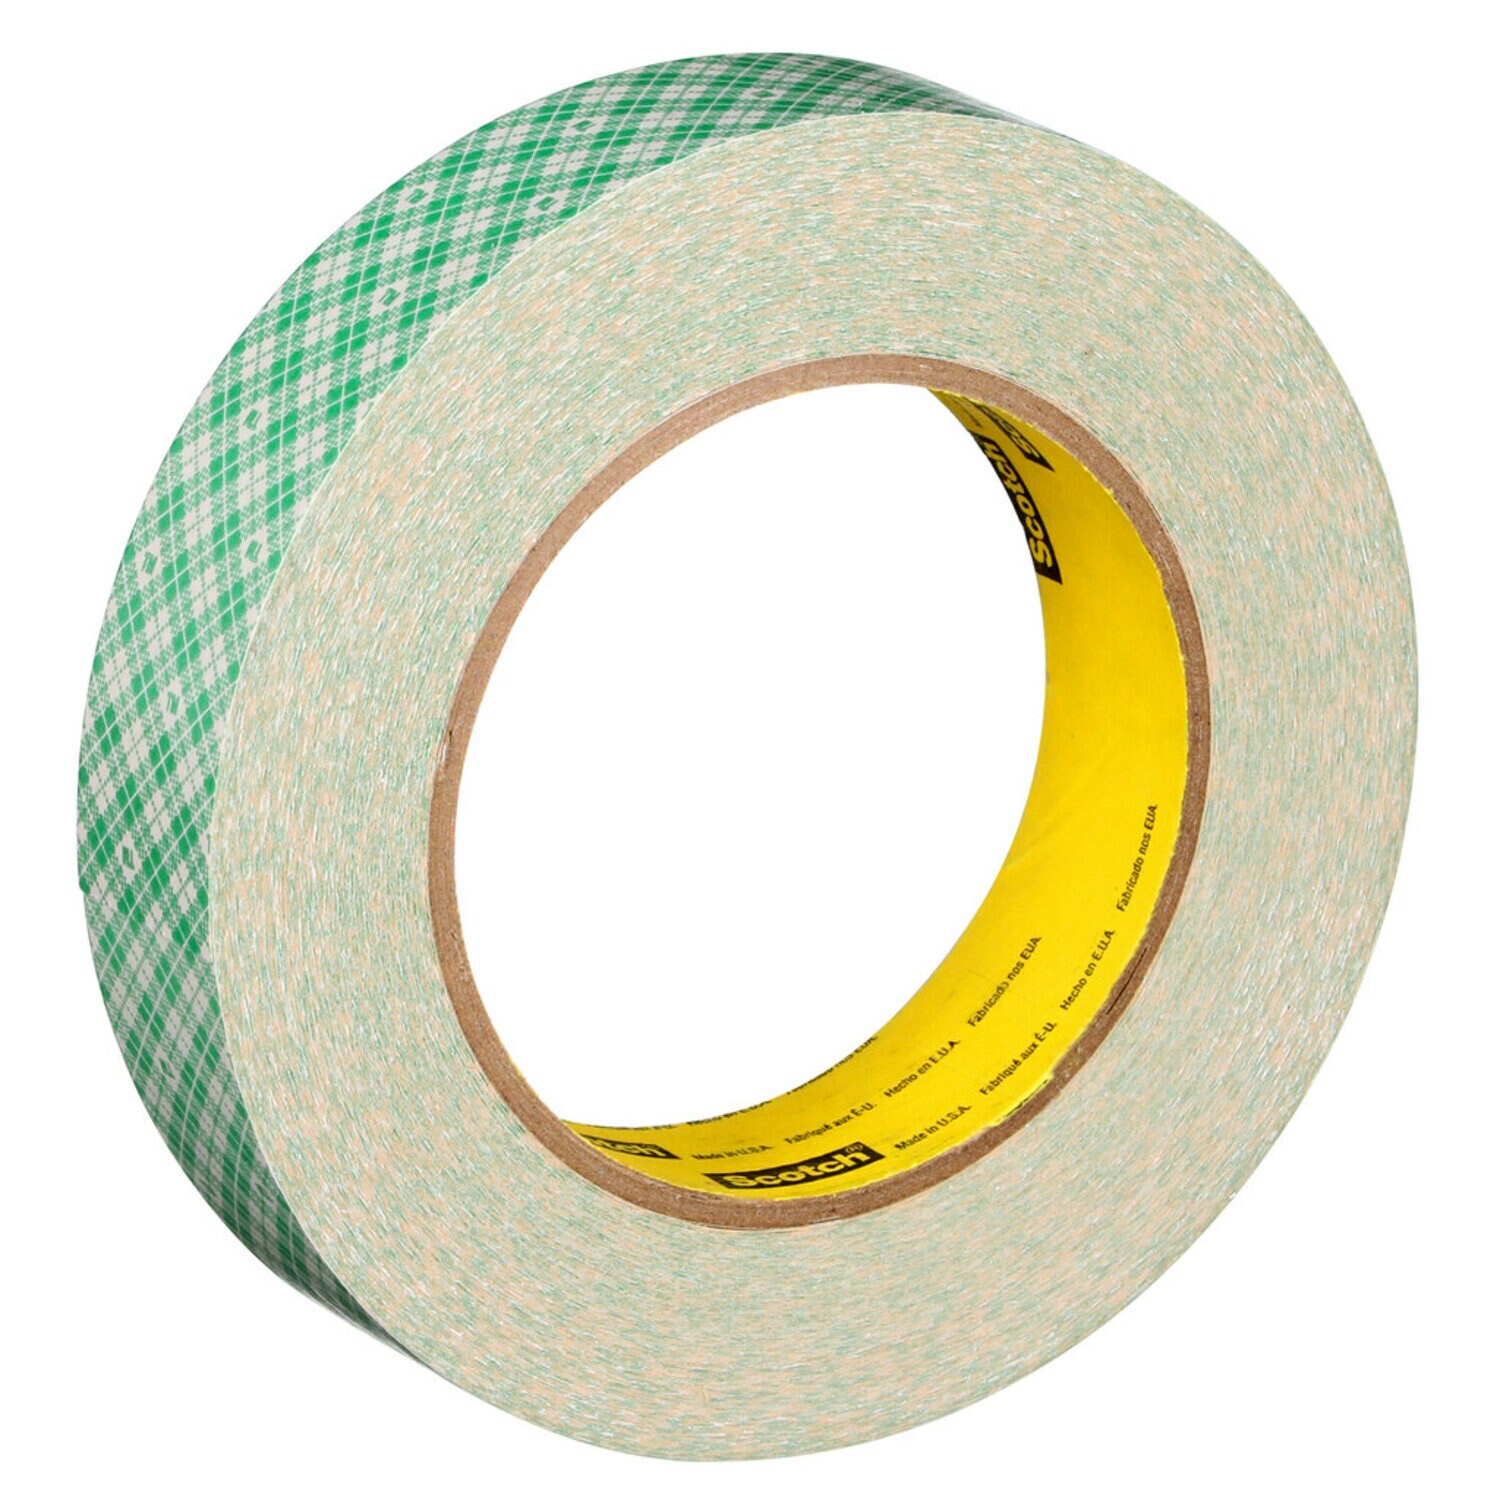 7100007291 - 3M Double Coated Paper Tape 410M, Natural, 1 in x 36 yd, 5 mil, 36
rolls per case